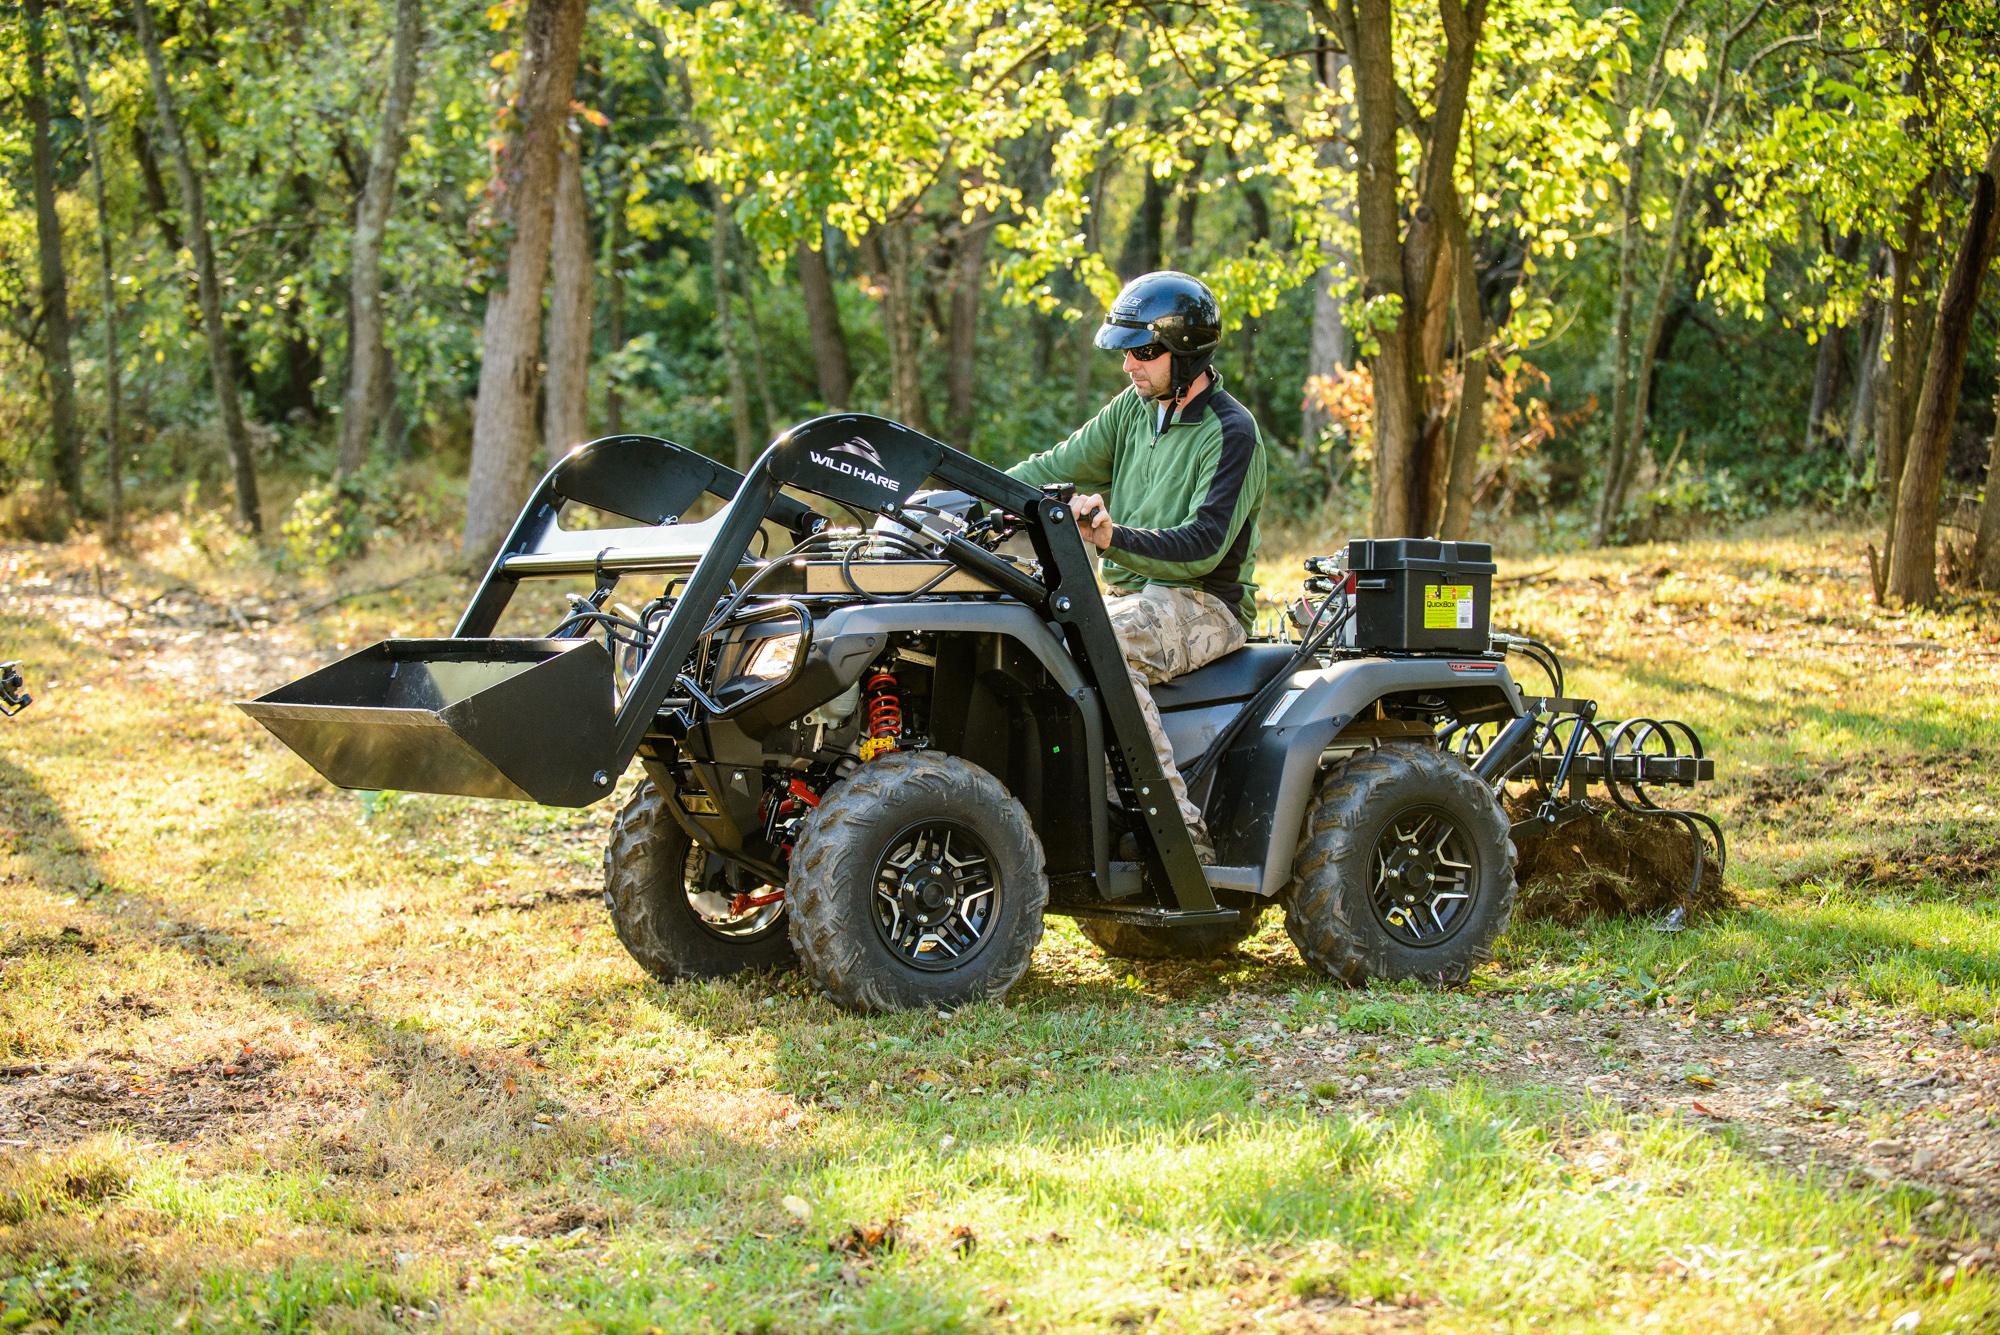 How To Turn On A Four Wheeler This All-In-One Kit Turns Your ATV Into A Sub-Compact Tractor | ATV Rider